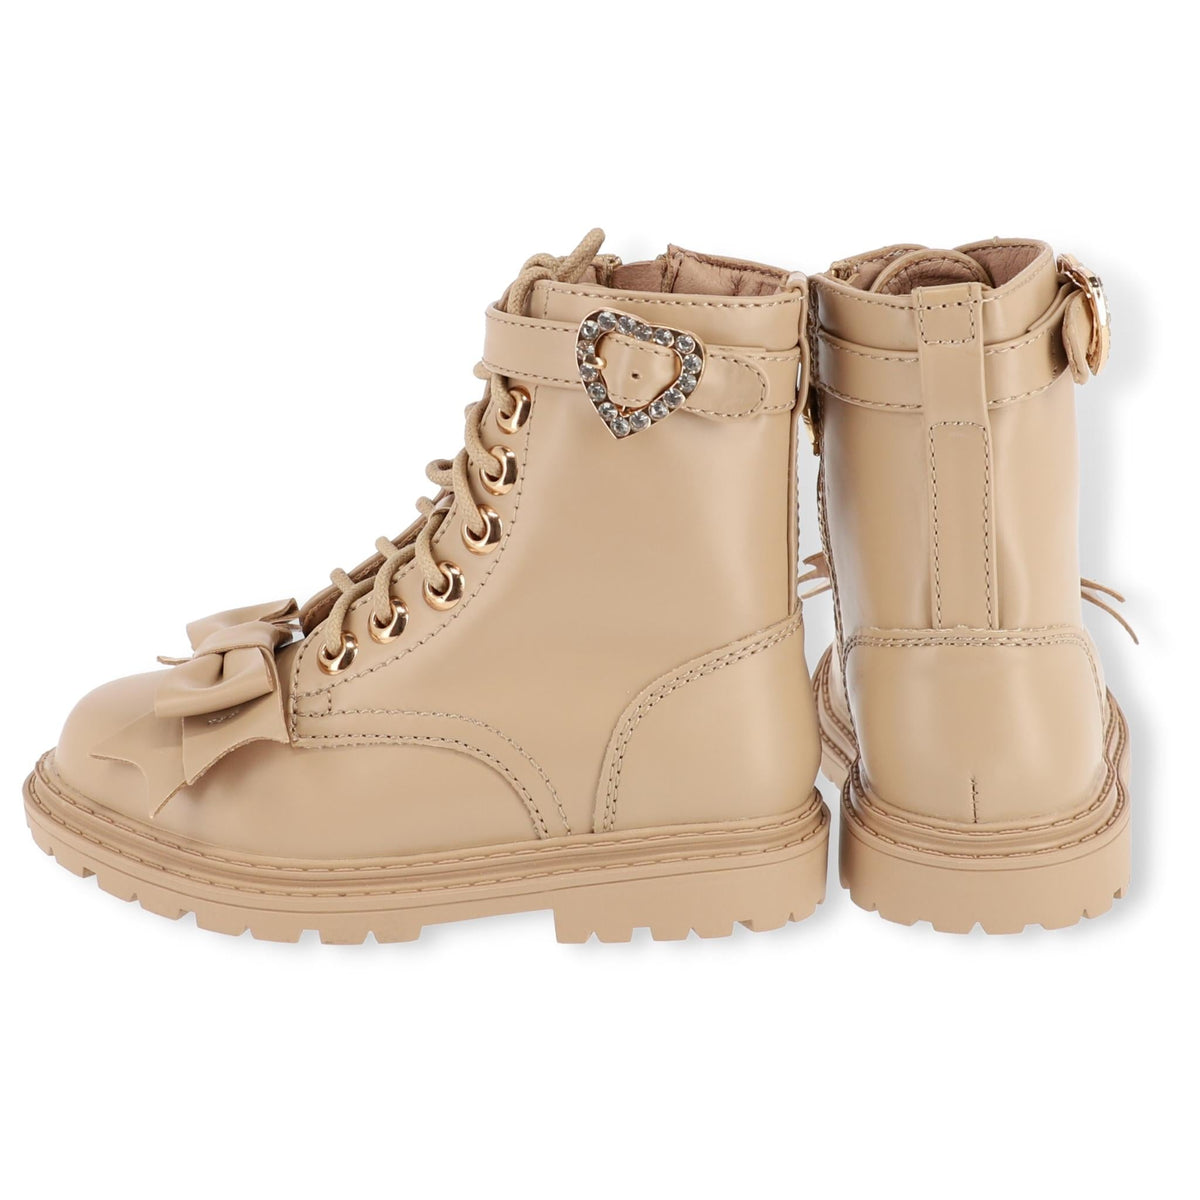 Angels Face Sand Ingrid Bow Boot - a Spirit Animal - Shoes $90-$120 30 active Oct 2022